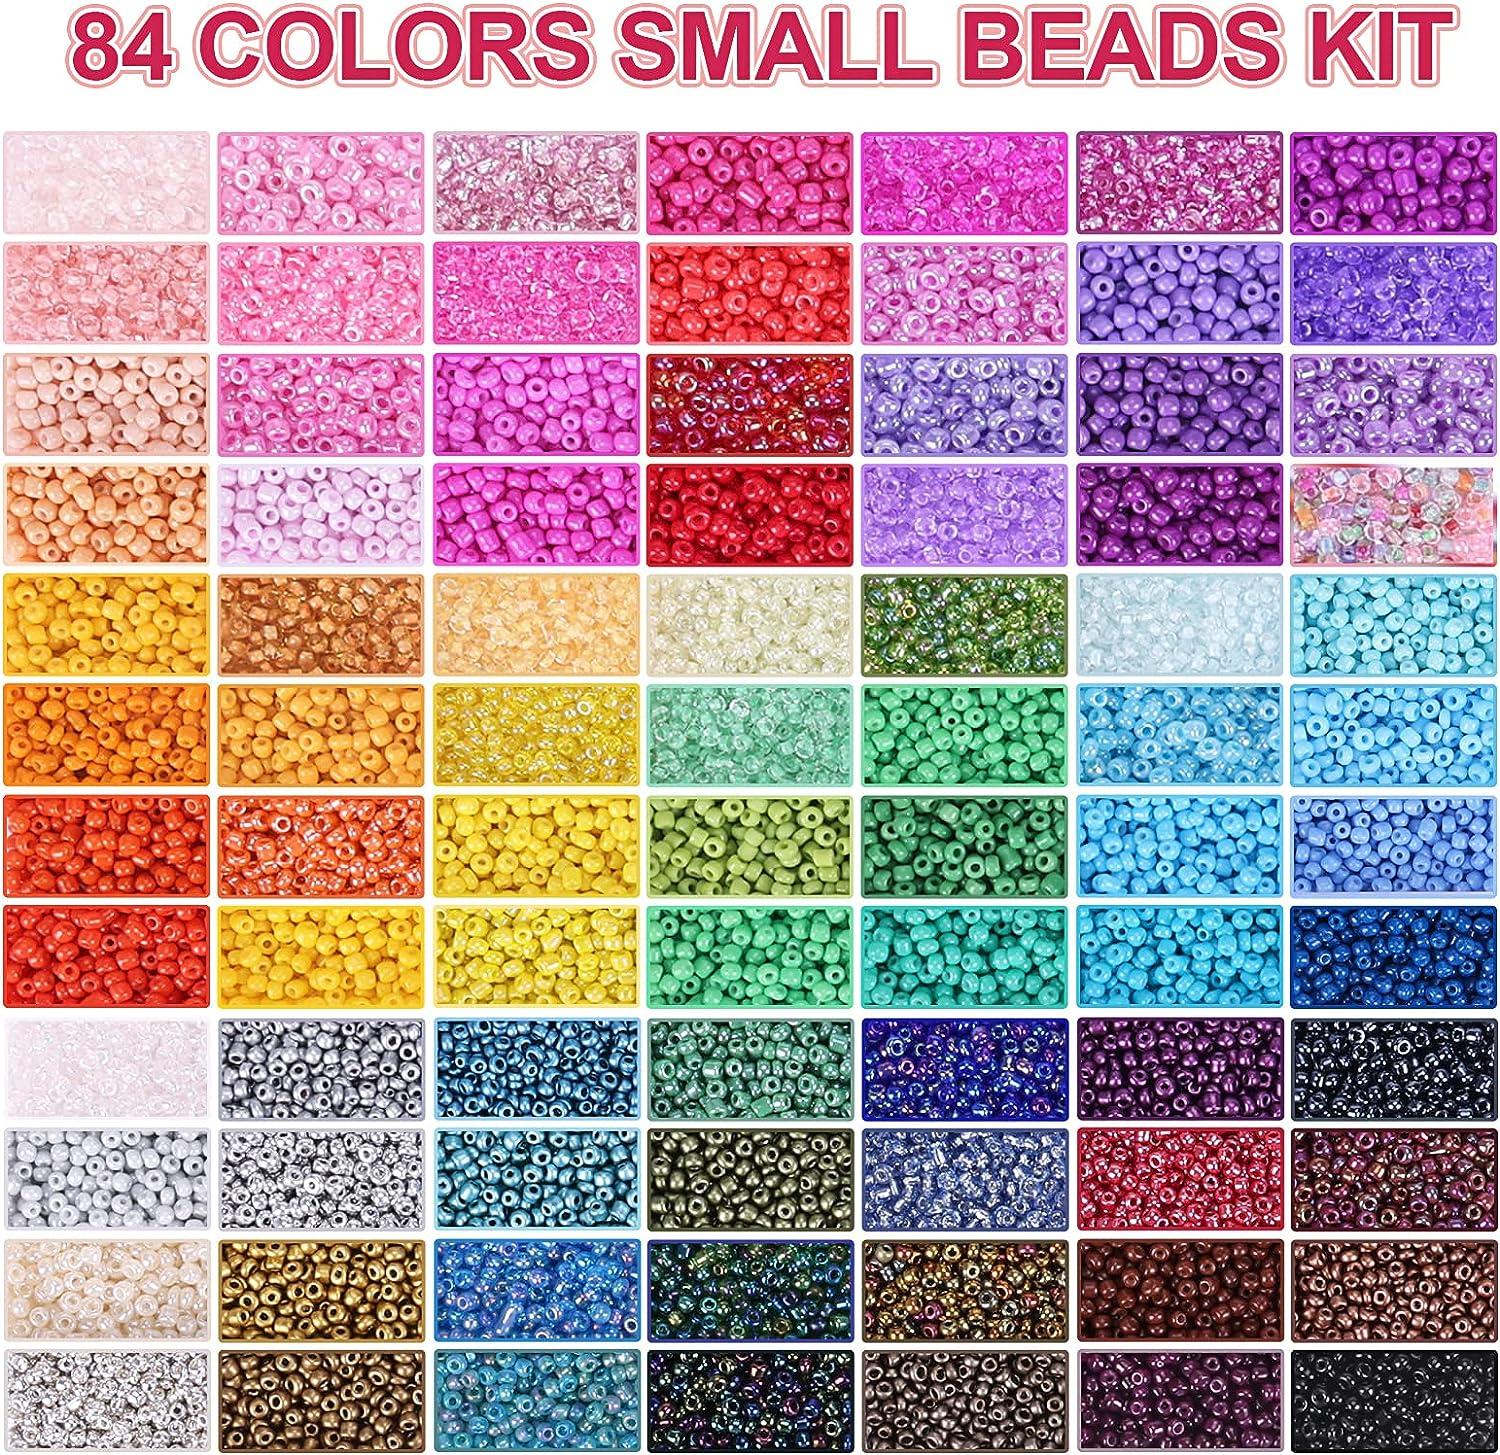 Quefe 36000pcs Glass Seed Beads, 2mm 12/0 Small Bracelets Beads and 260  Letter Beads for Jewelry Making Crafts